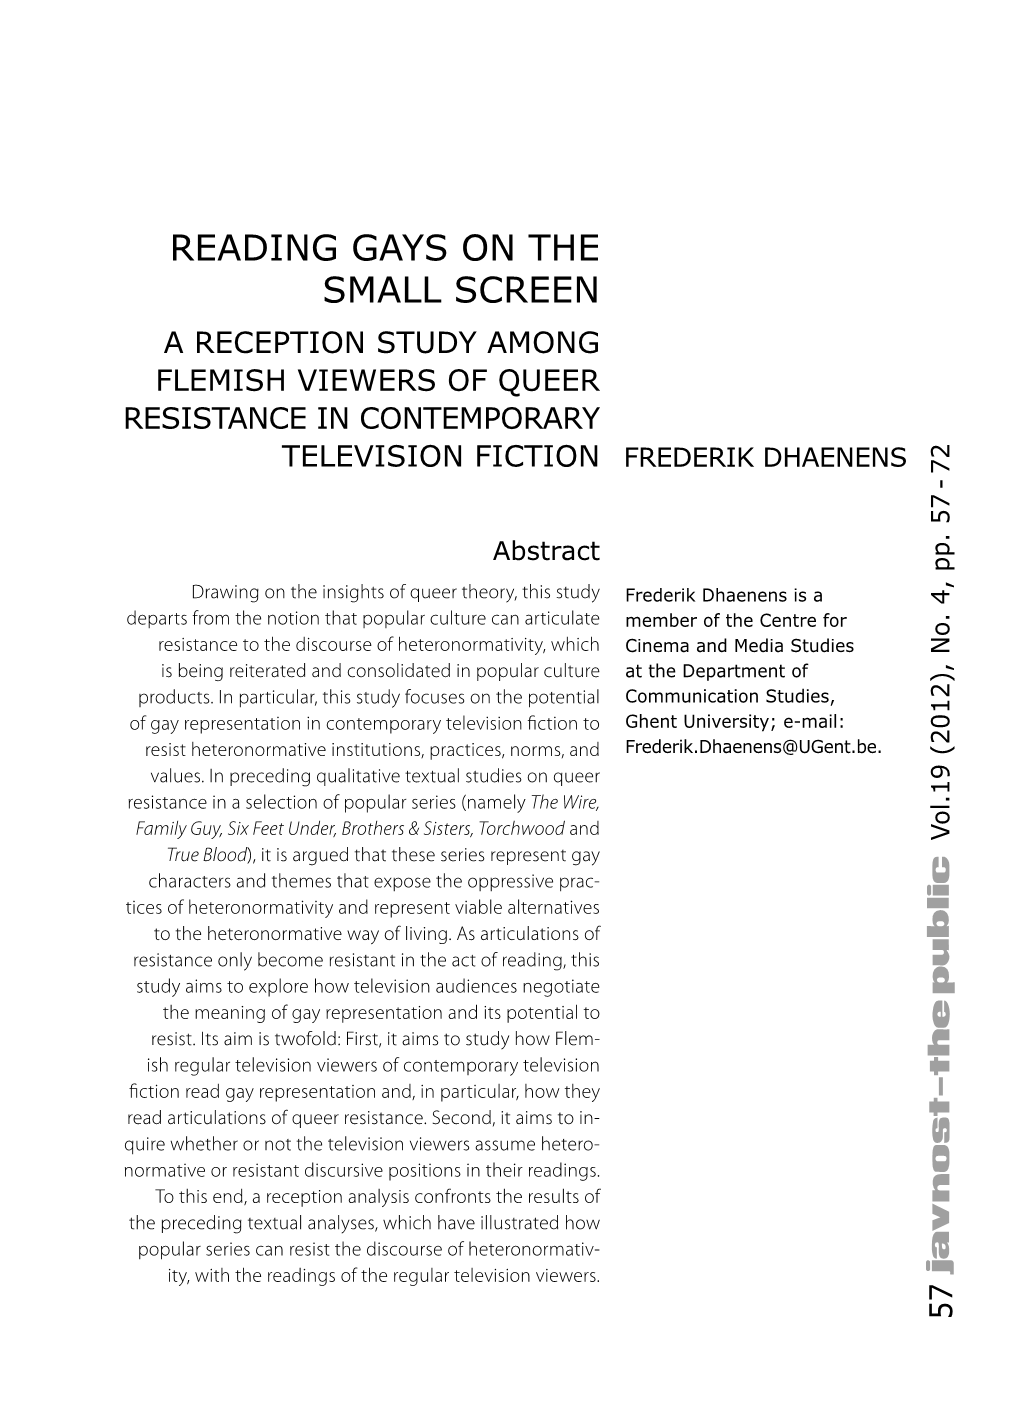 Reading Gays on the Small Screen: a Reception Study Among Flemish